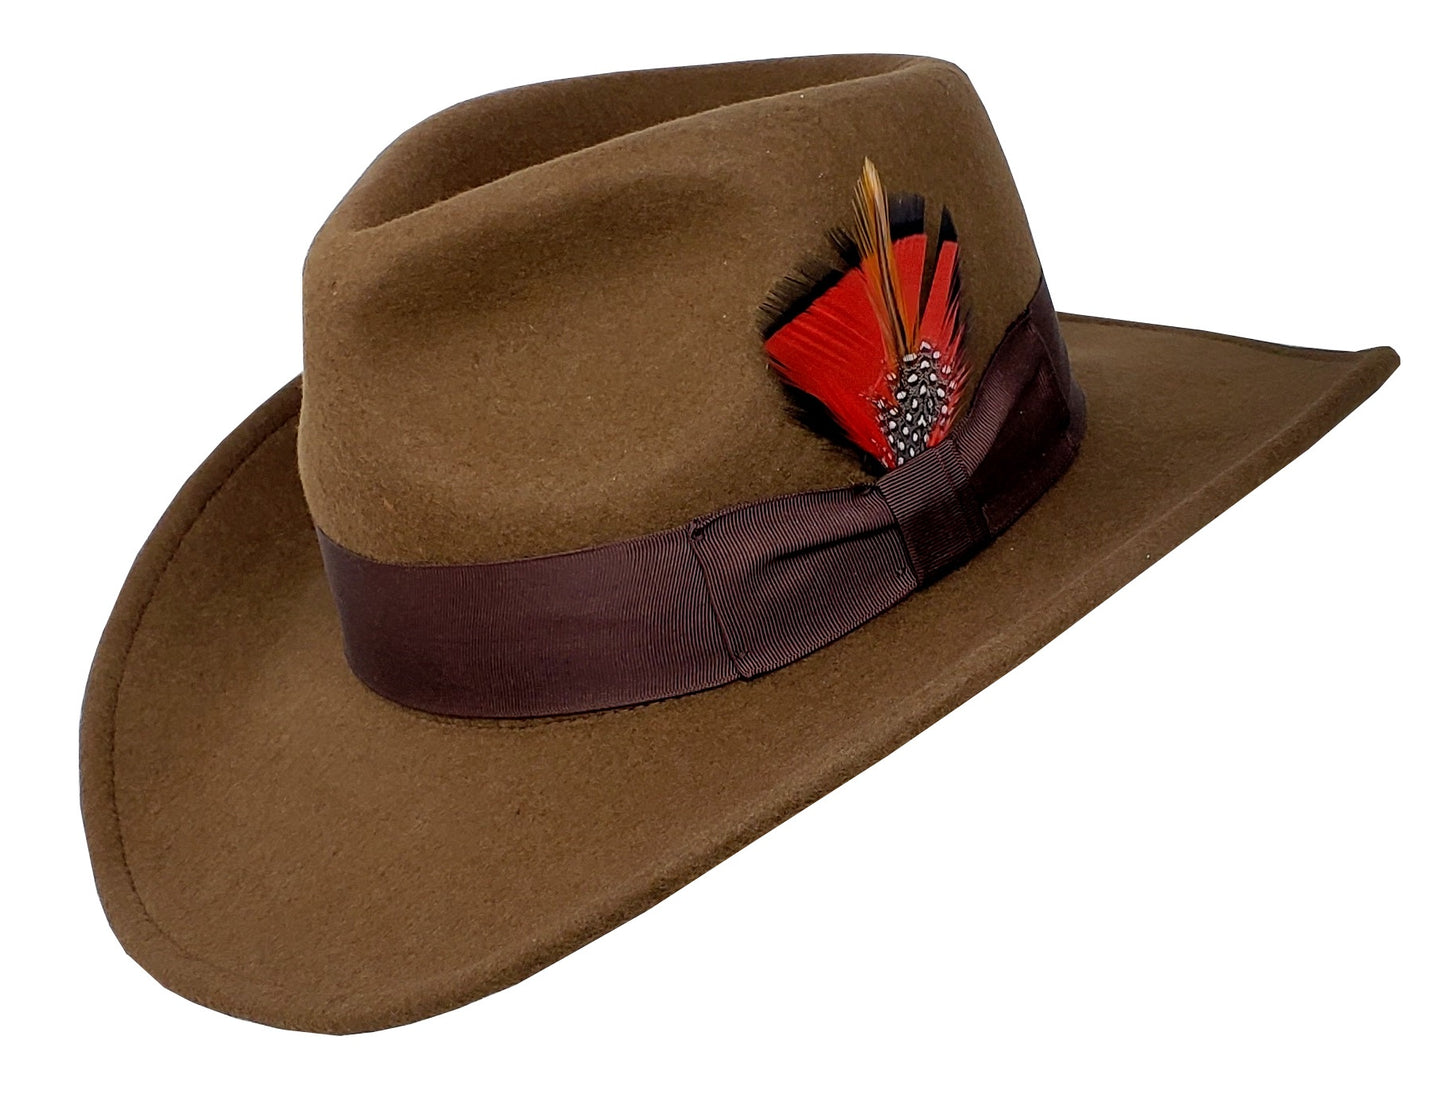 Different Touch Indiana Jones Outback Cowboy Crushable Wool Fedora Hat